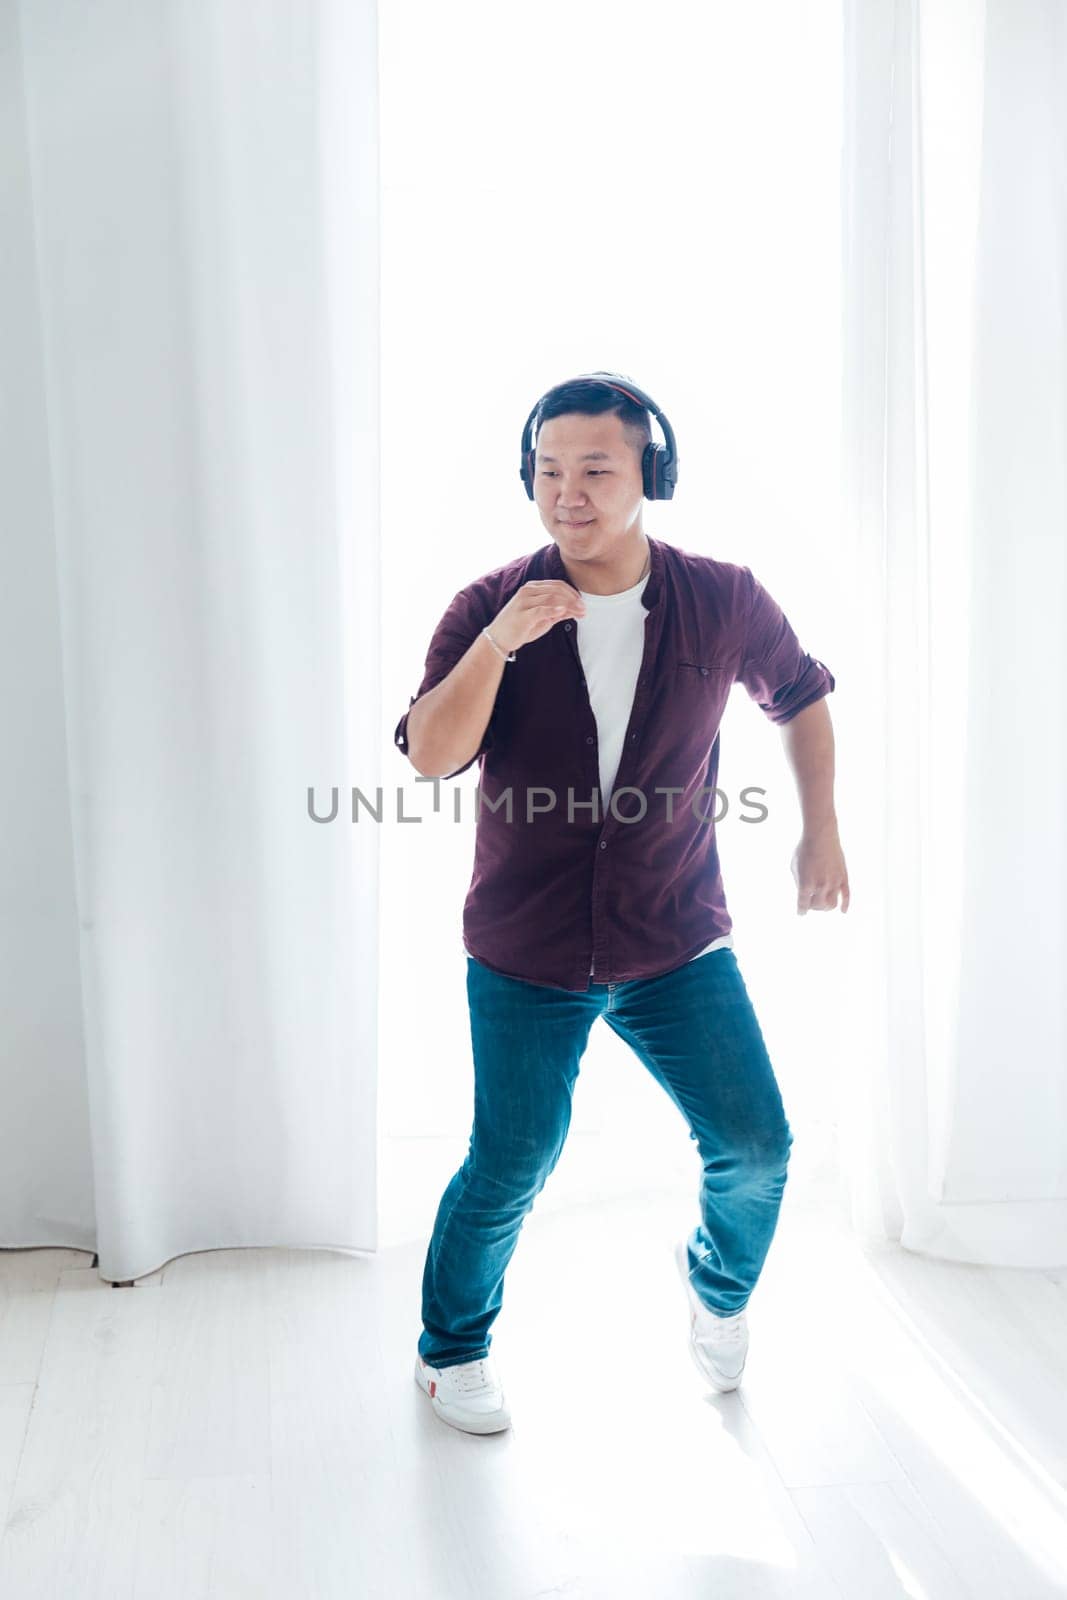 a man in headphones dancing to music in the studio hall by Simakov